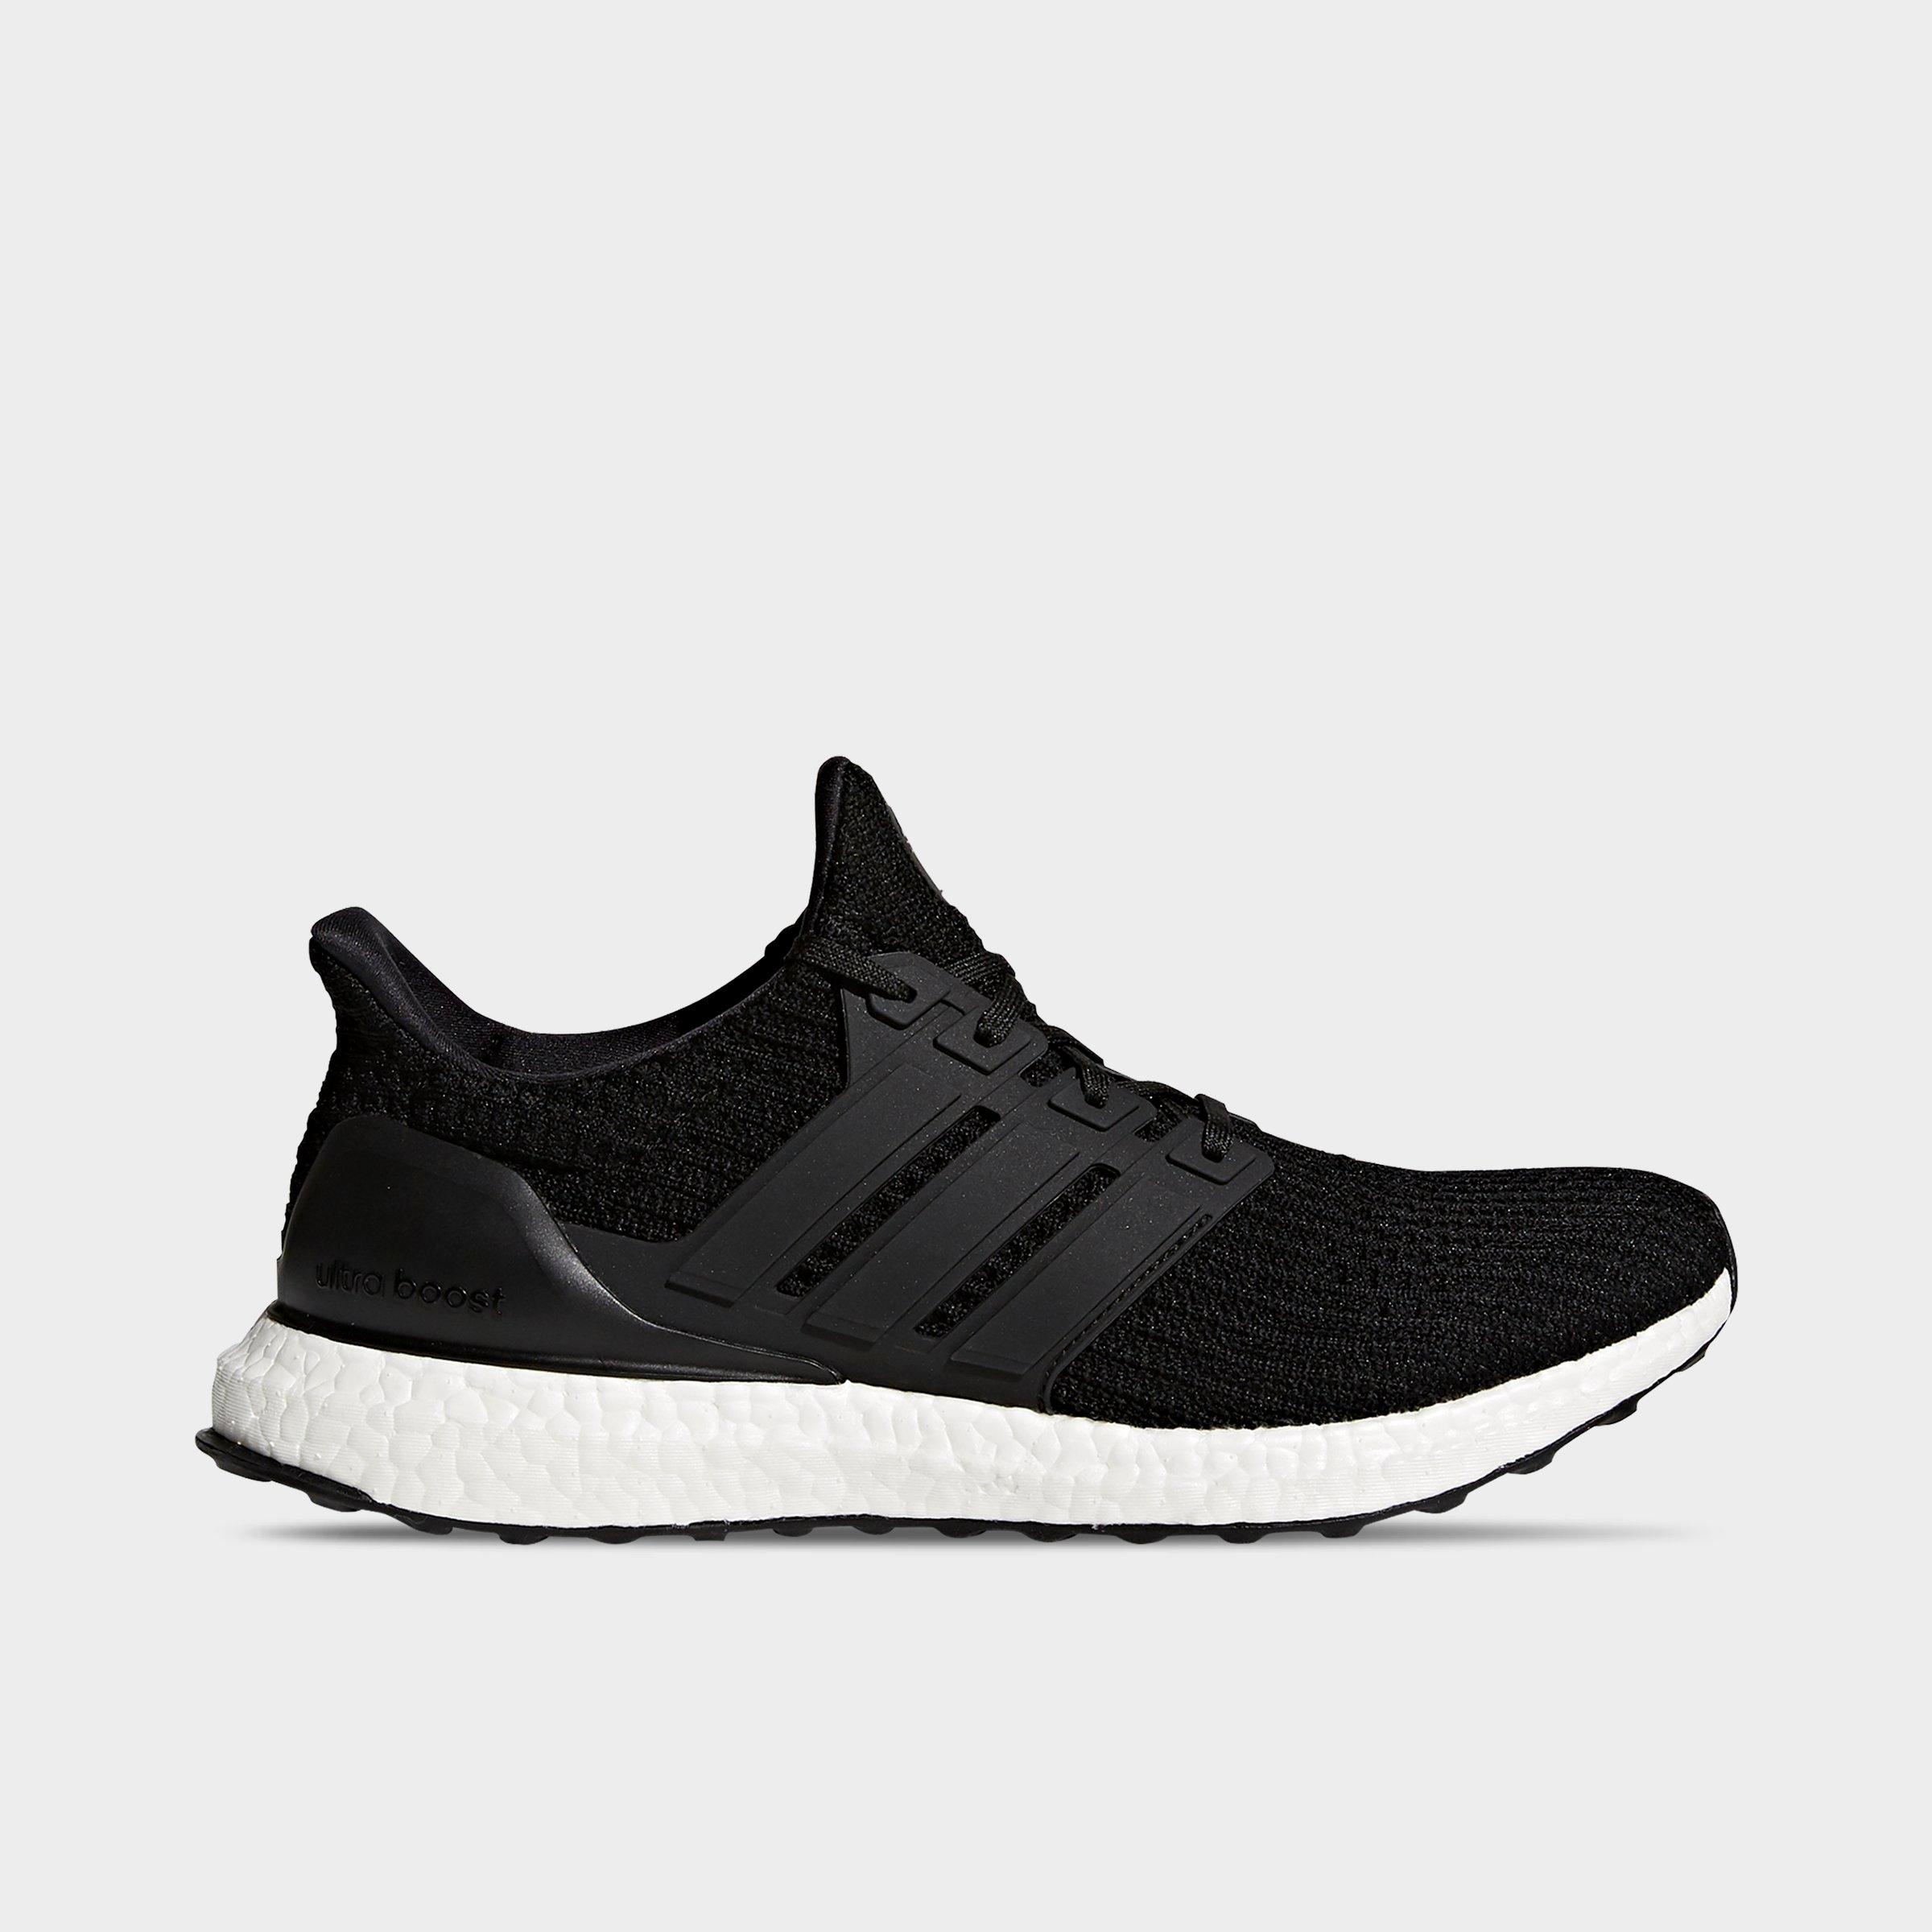 UPC 191028357242 product image for Adidas Men's UltraBOOST Running Shoes in Black/Core Black Size 8.5 Knit | upcitemdb.com